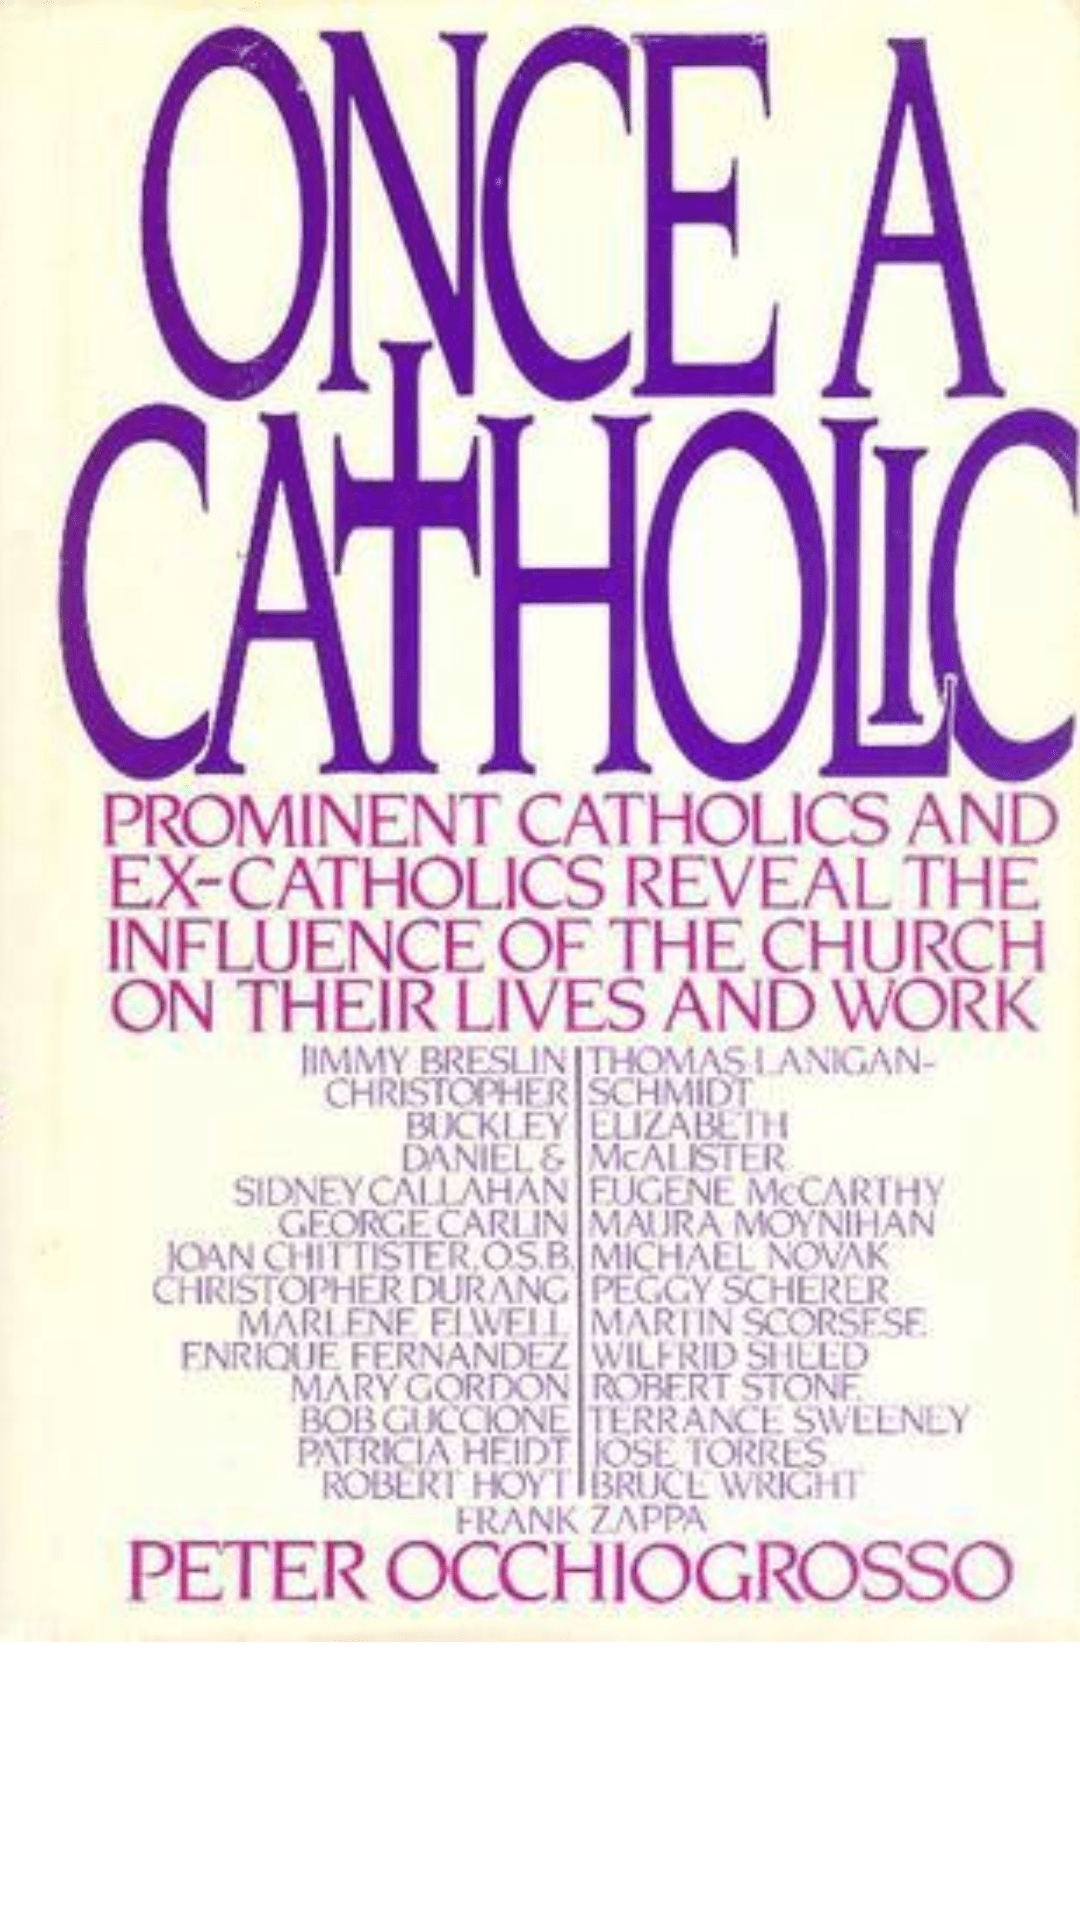 Once a Catholic: Prominent Catholics and Ex-Catholics Discuss the Influence of the Church on Their Lives and Work